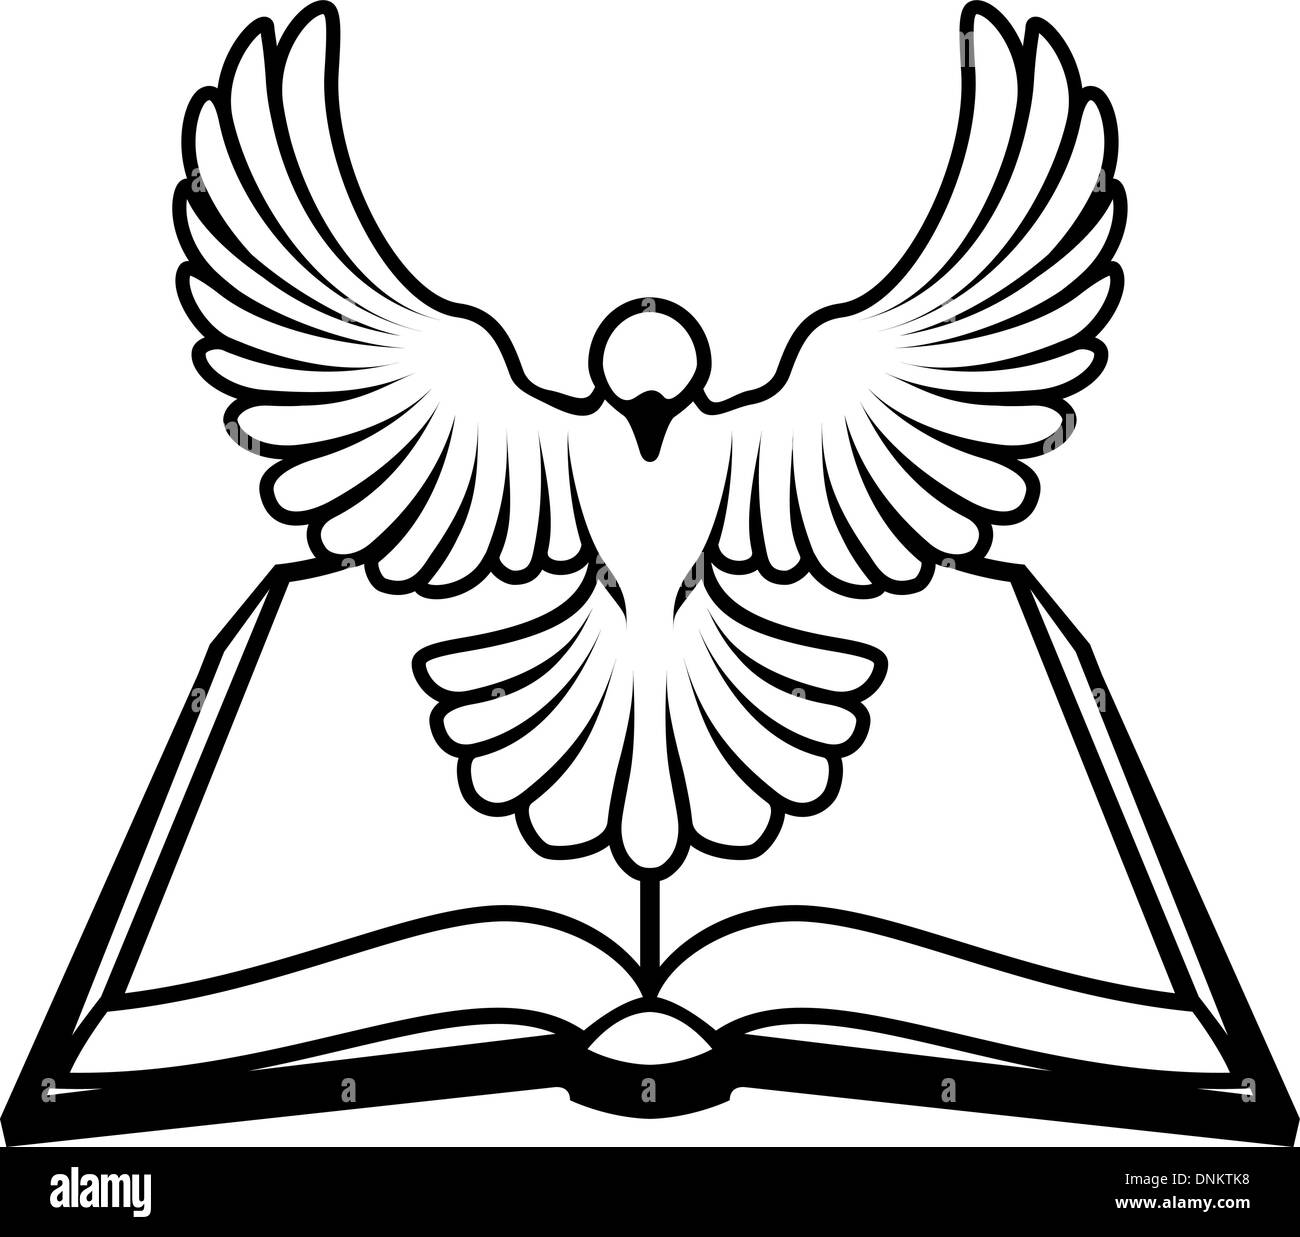 A Christian Bible dove concept, with a white dove representing the holy spirit flying out of the bible. Could refer to inerrant Stock Vector